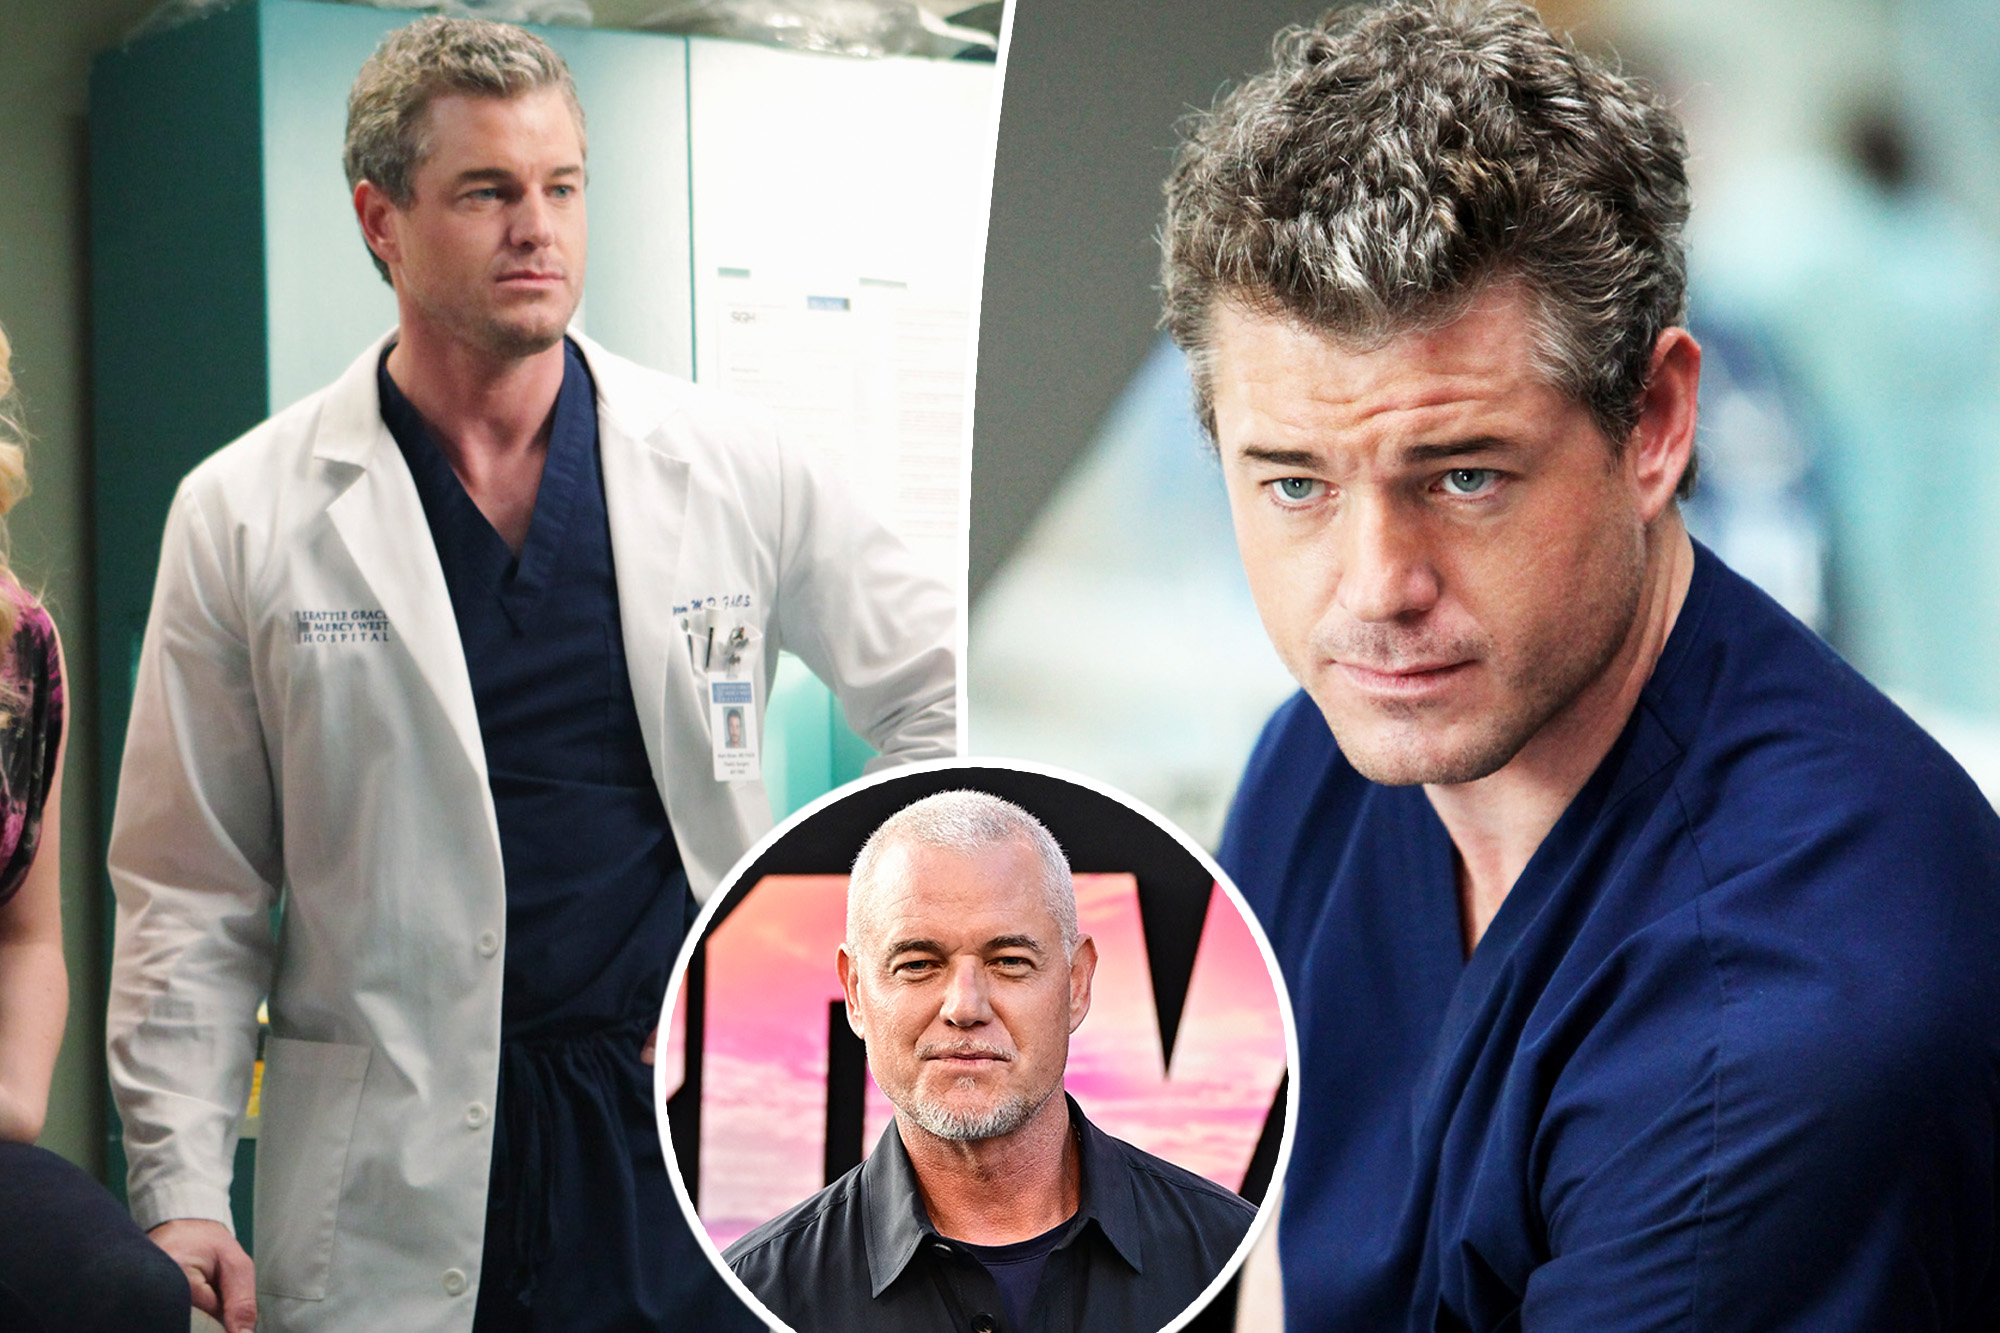 Eric Dane Spills the Tea on His 'Grey's Anatomy' Exit - You Won't Believe the Real Reason!